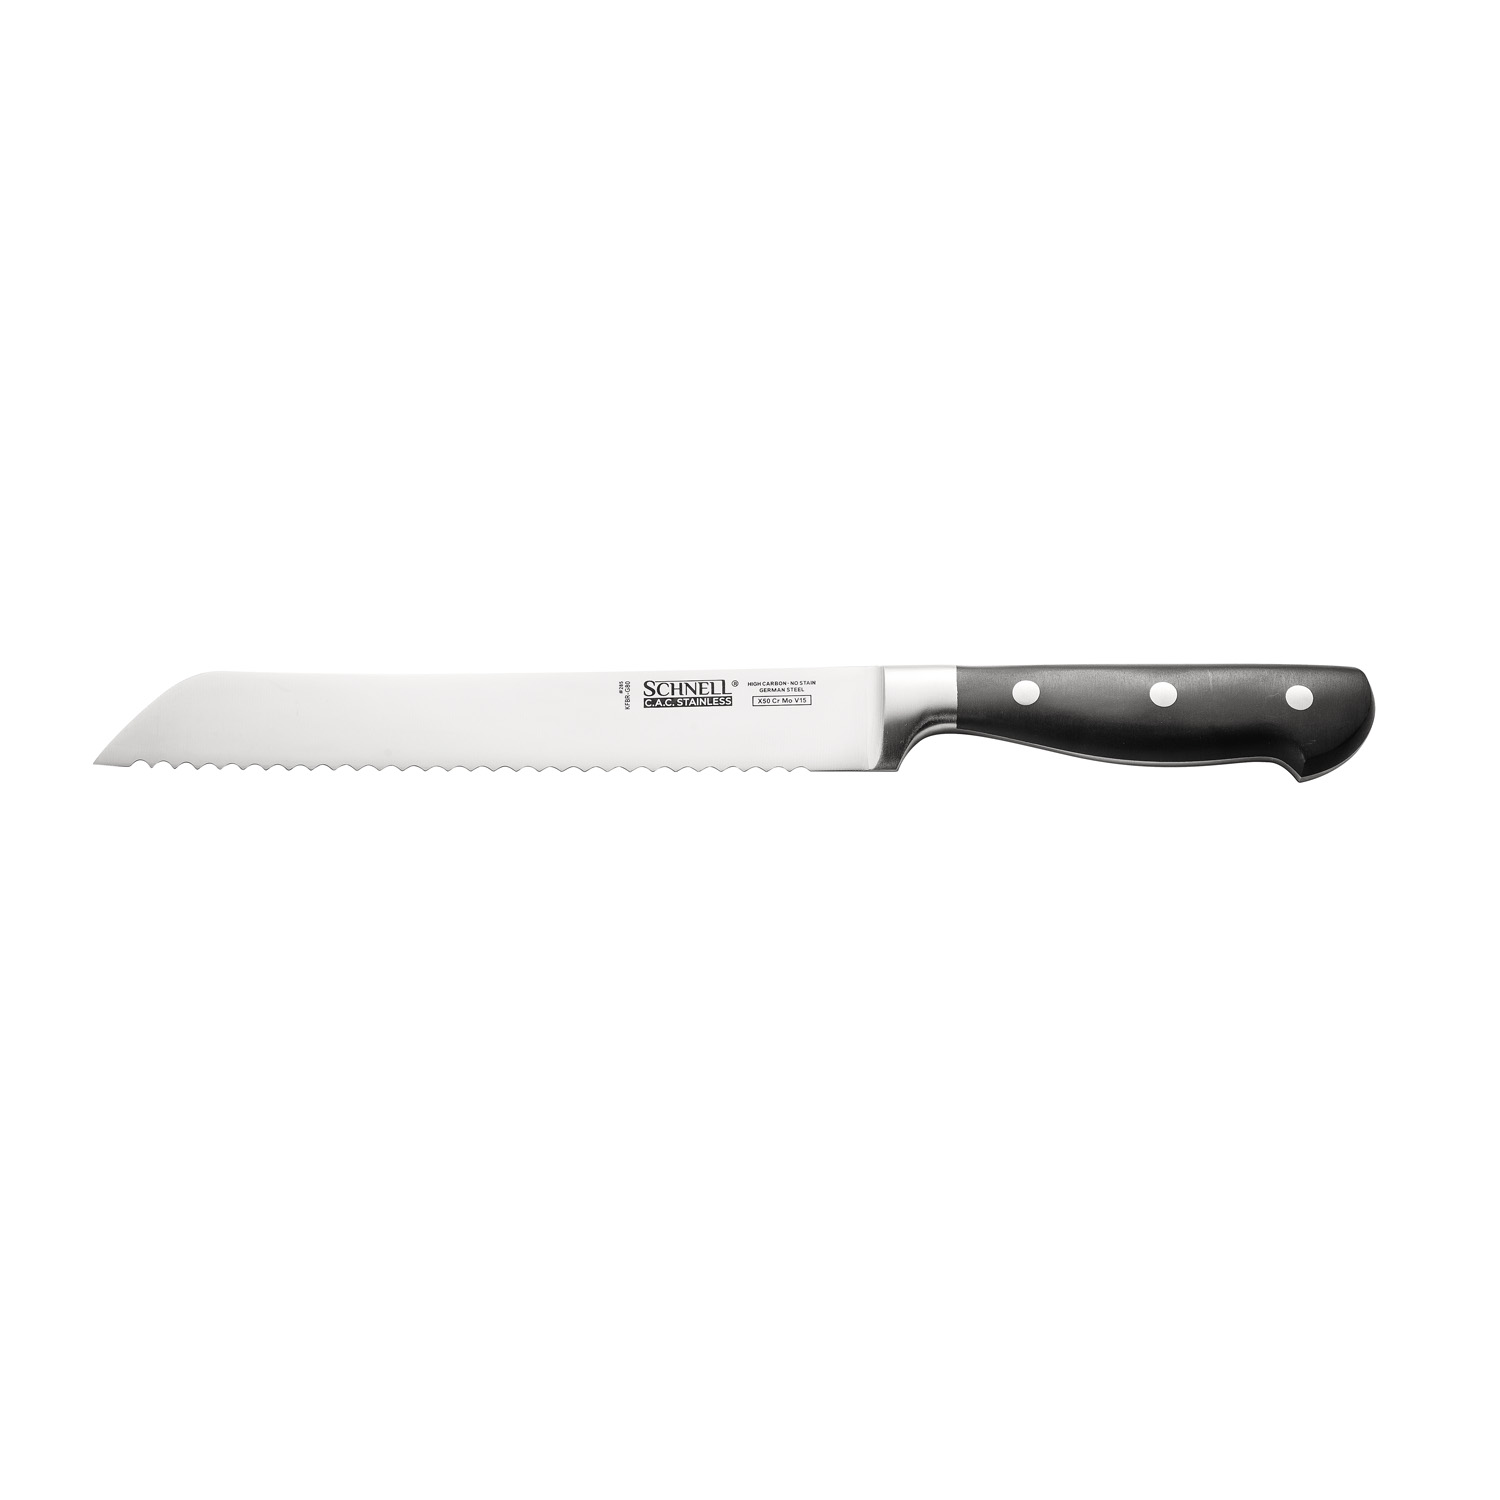 CAC China KFBR-G80 Schnell Bread Knife 8"